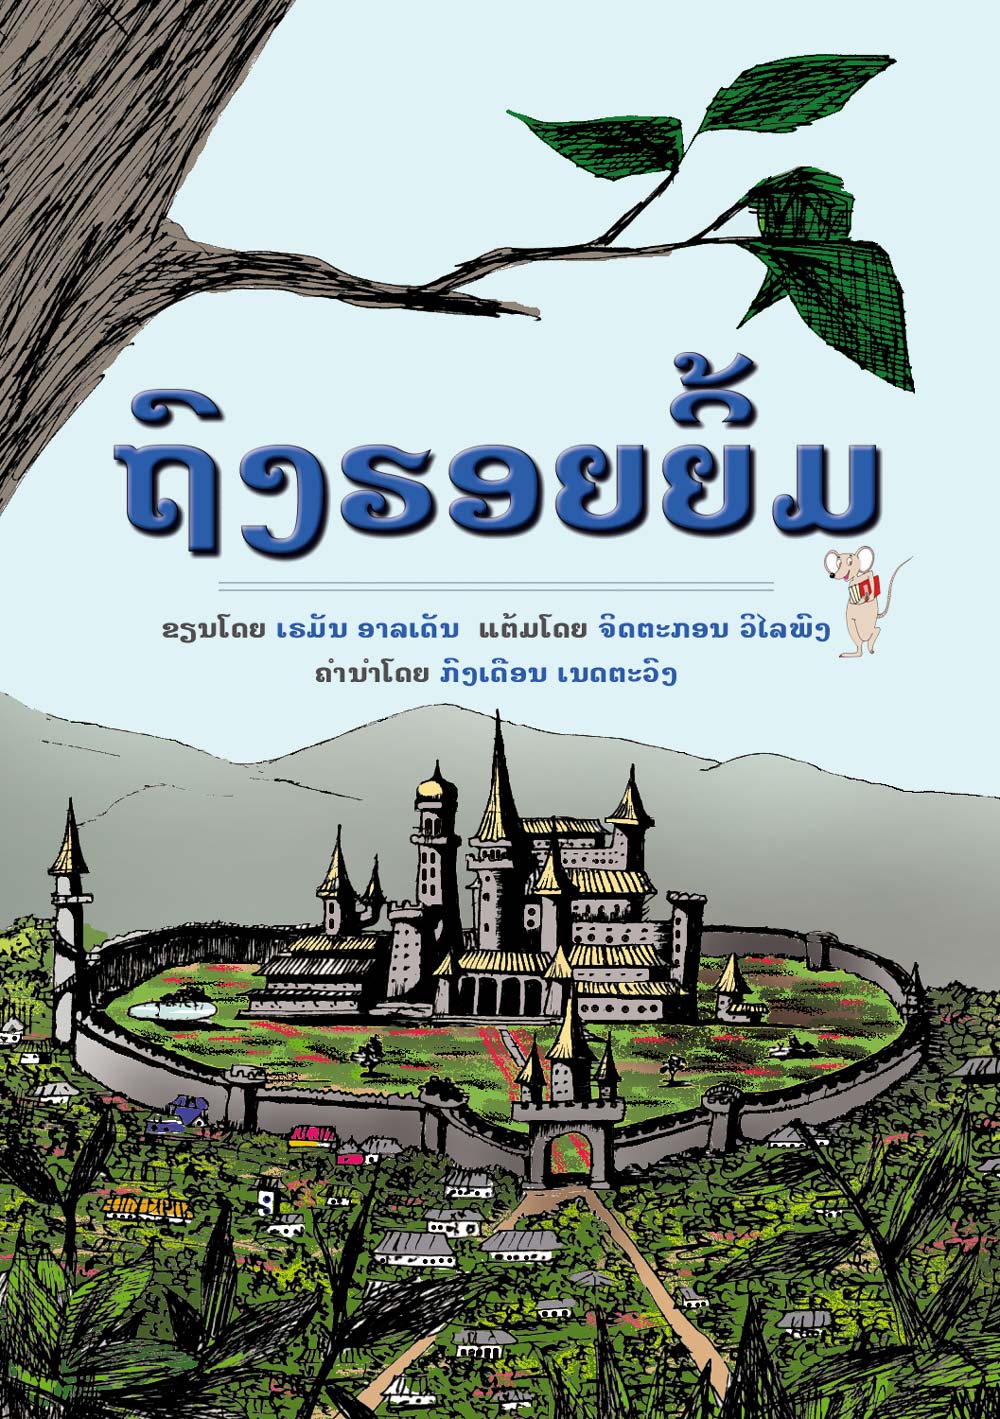 The Bag of Smiles large book cover, published in Lao language